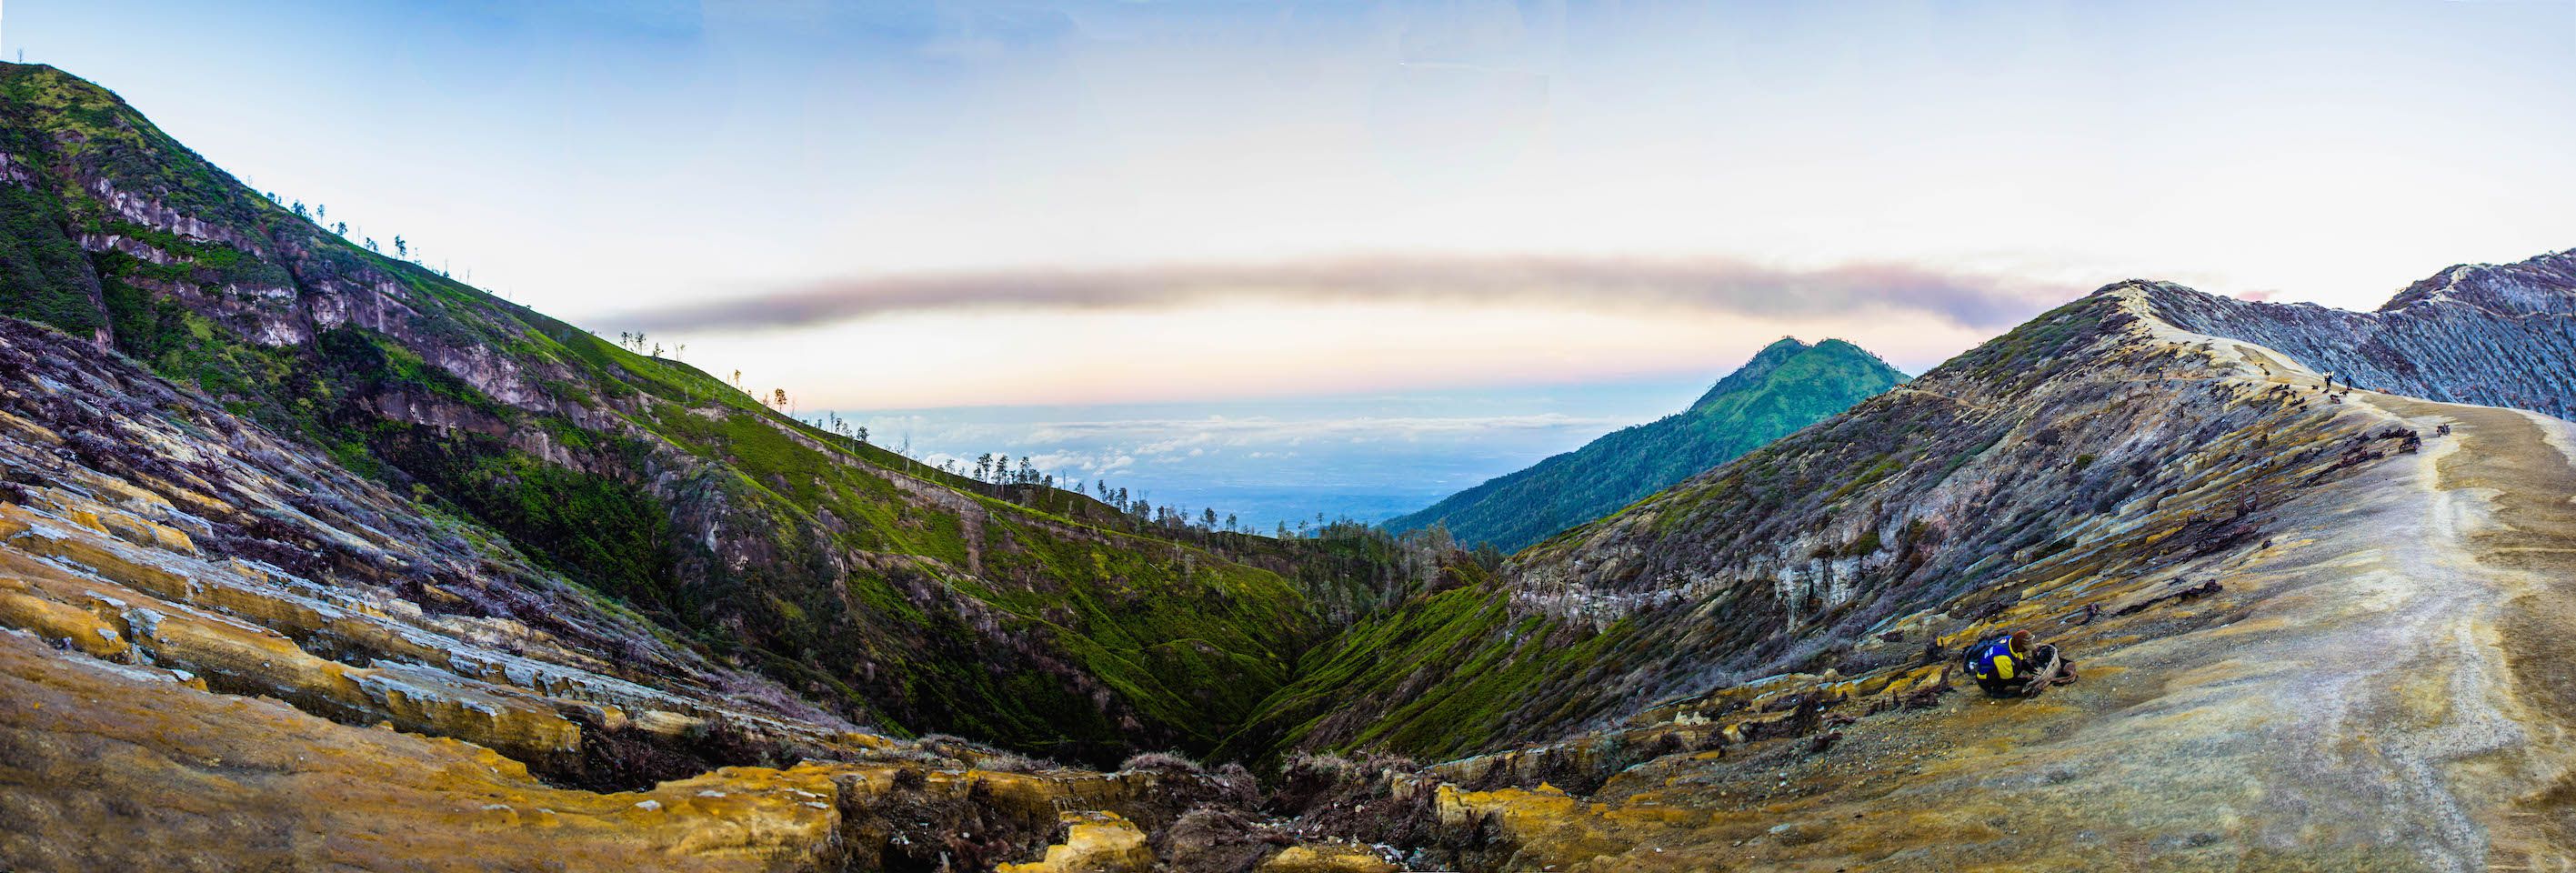 Panoramic view of the landscape at Mt. Ijen, Indonesia